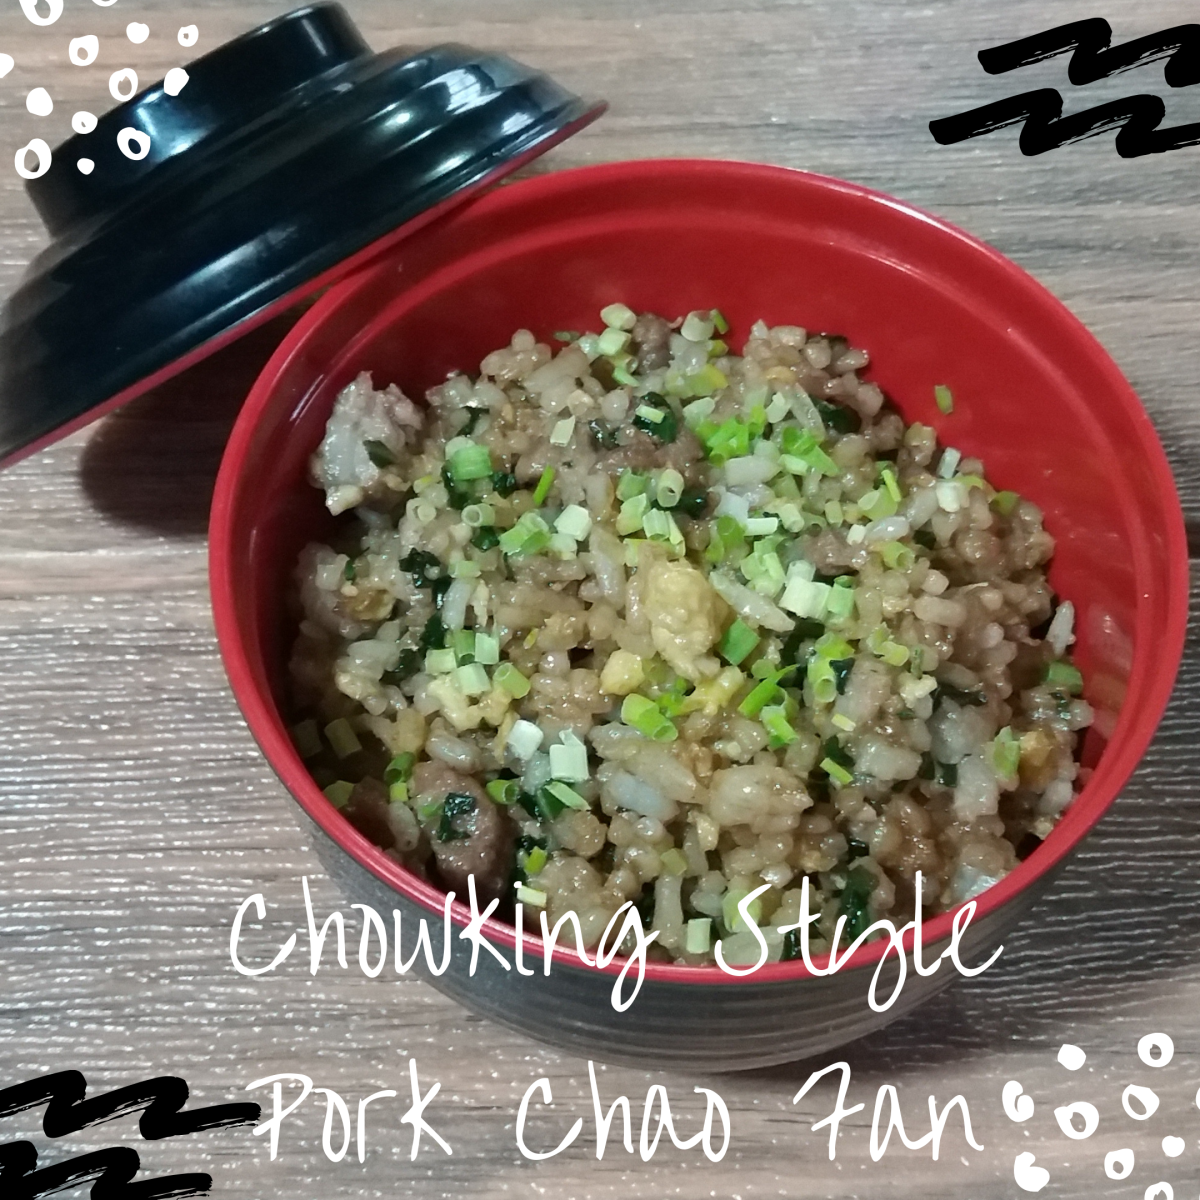 How to Cook Chowking-Style Pork Chao Fan